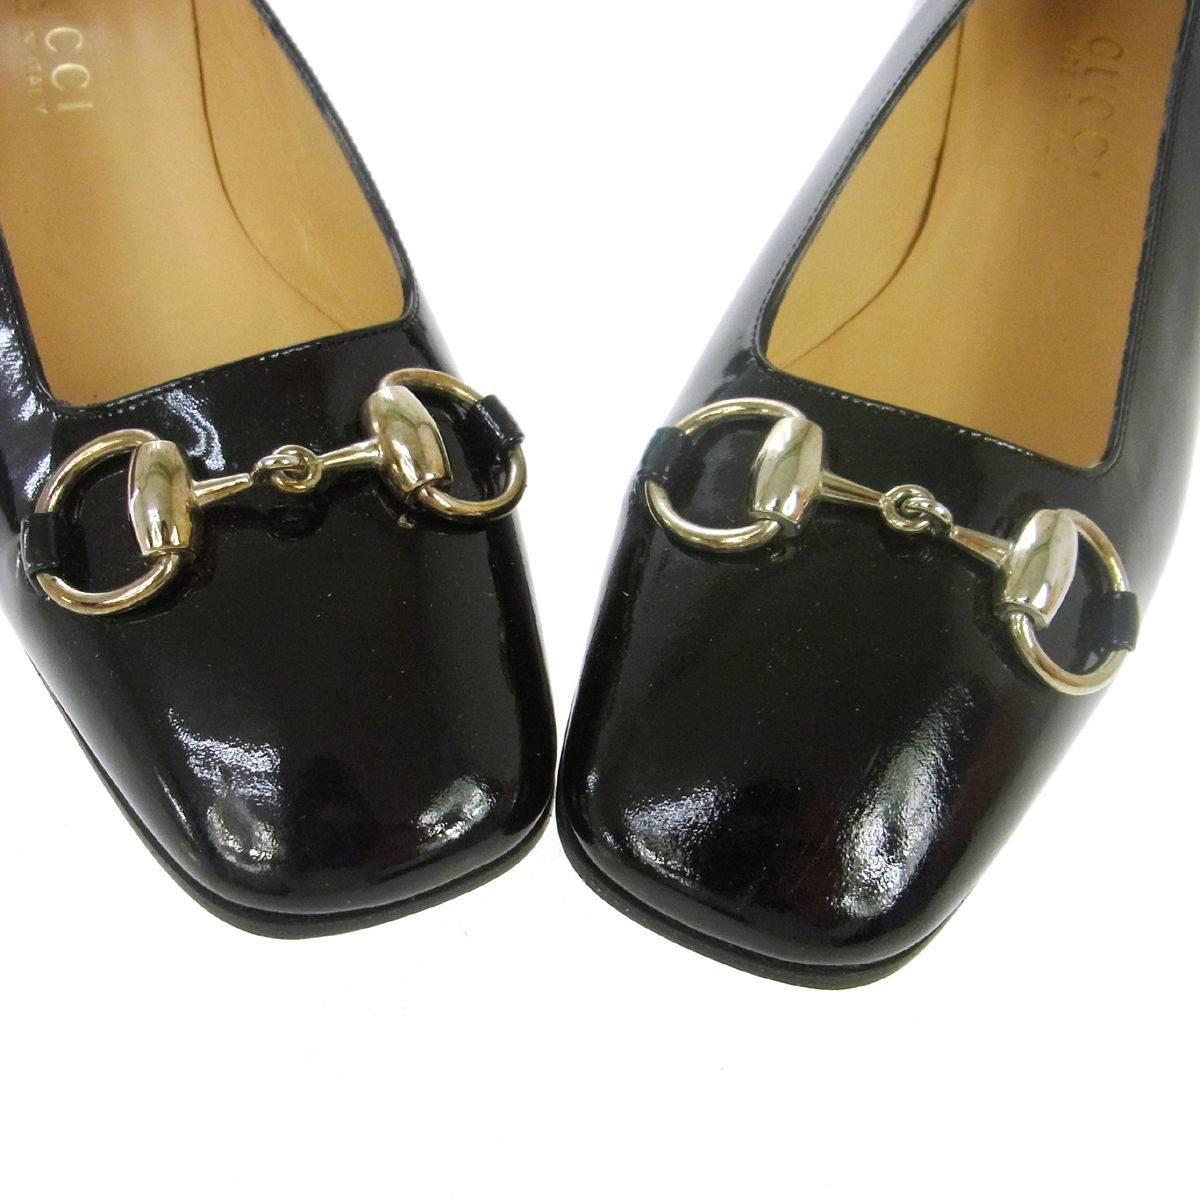 CURATOR'S NOTES

Gucci NEW Vintage Black Patent Horsebit Marmont Style Loafers Pumps in Box 

Size 36.5 C
Patent leather
Metal hardware
Slip on 
Made in Italy
Heel height 1.5"
Includes original Gucci box
